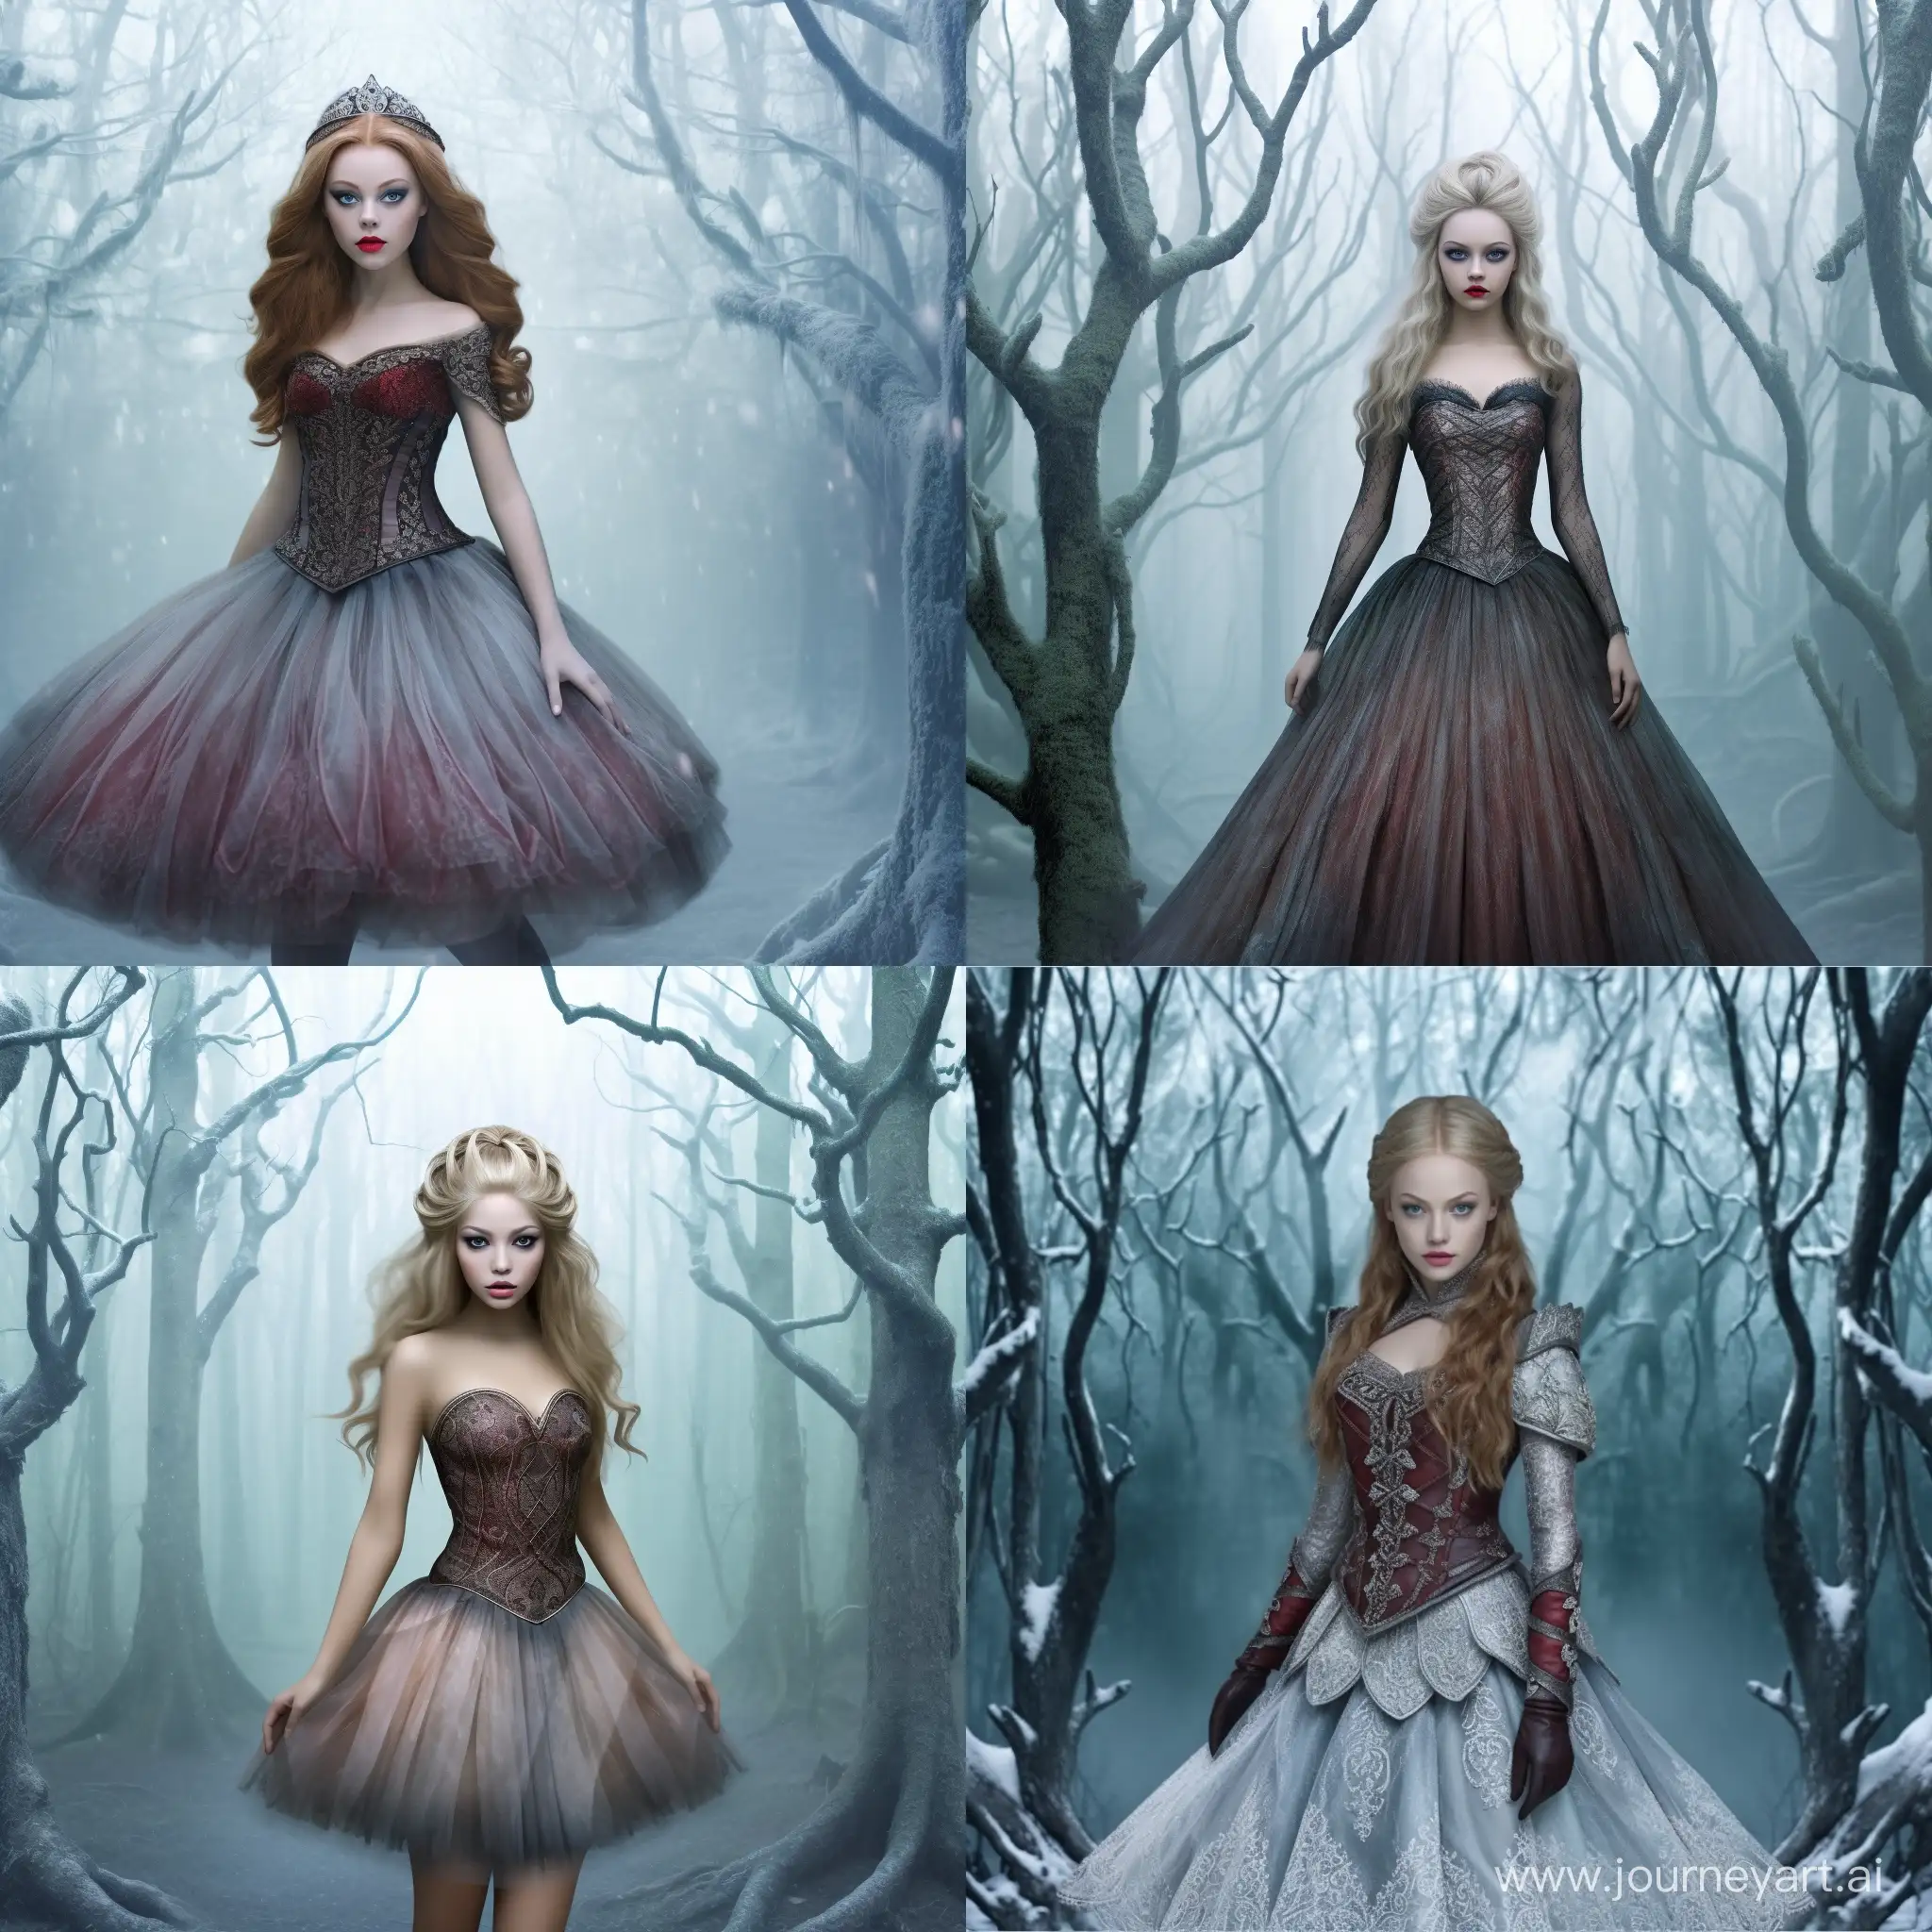 Enchanting-Nordic-Model-Amidst-Ice-Forest-with-Magical-Dust